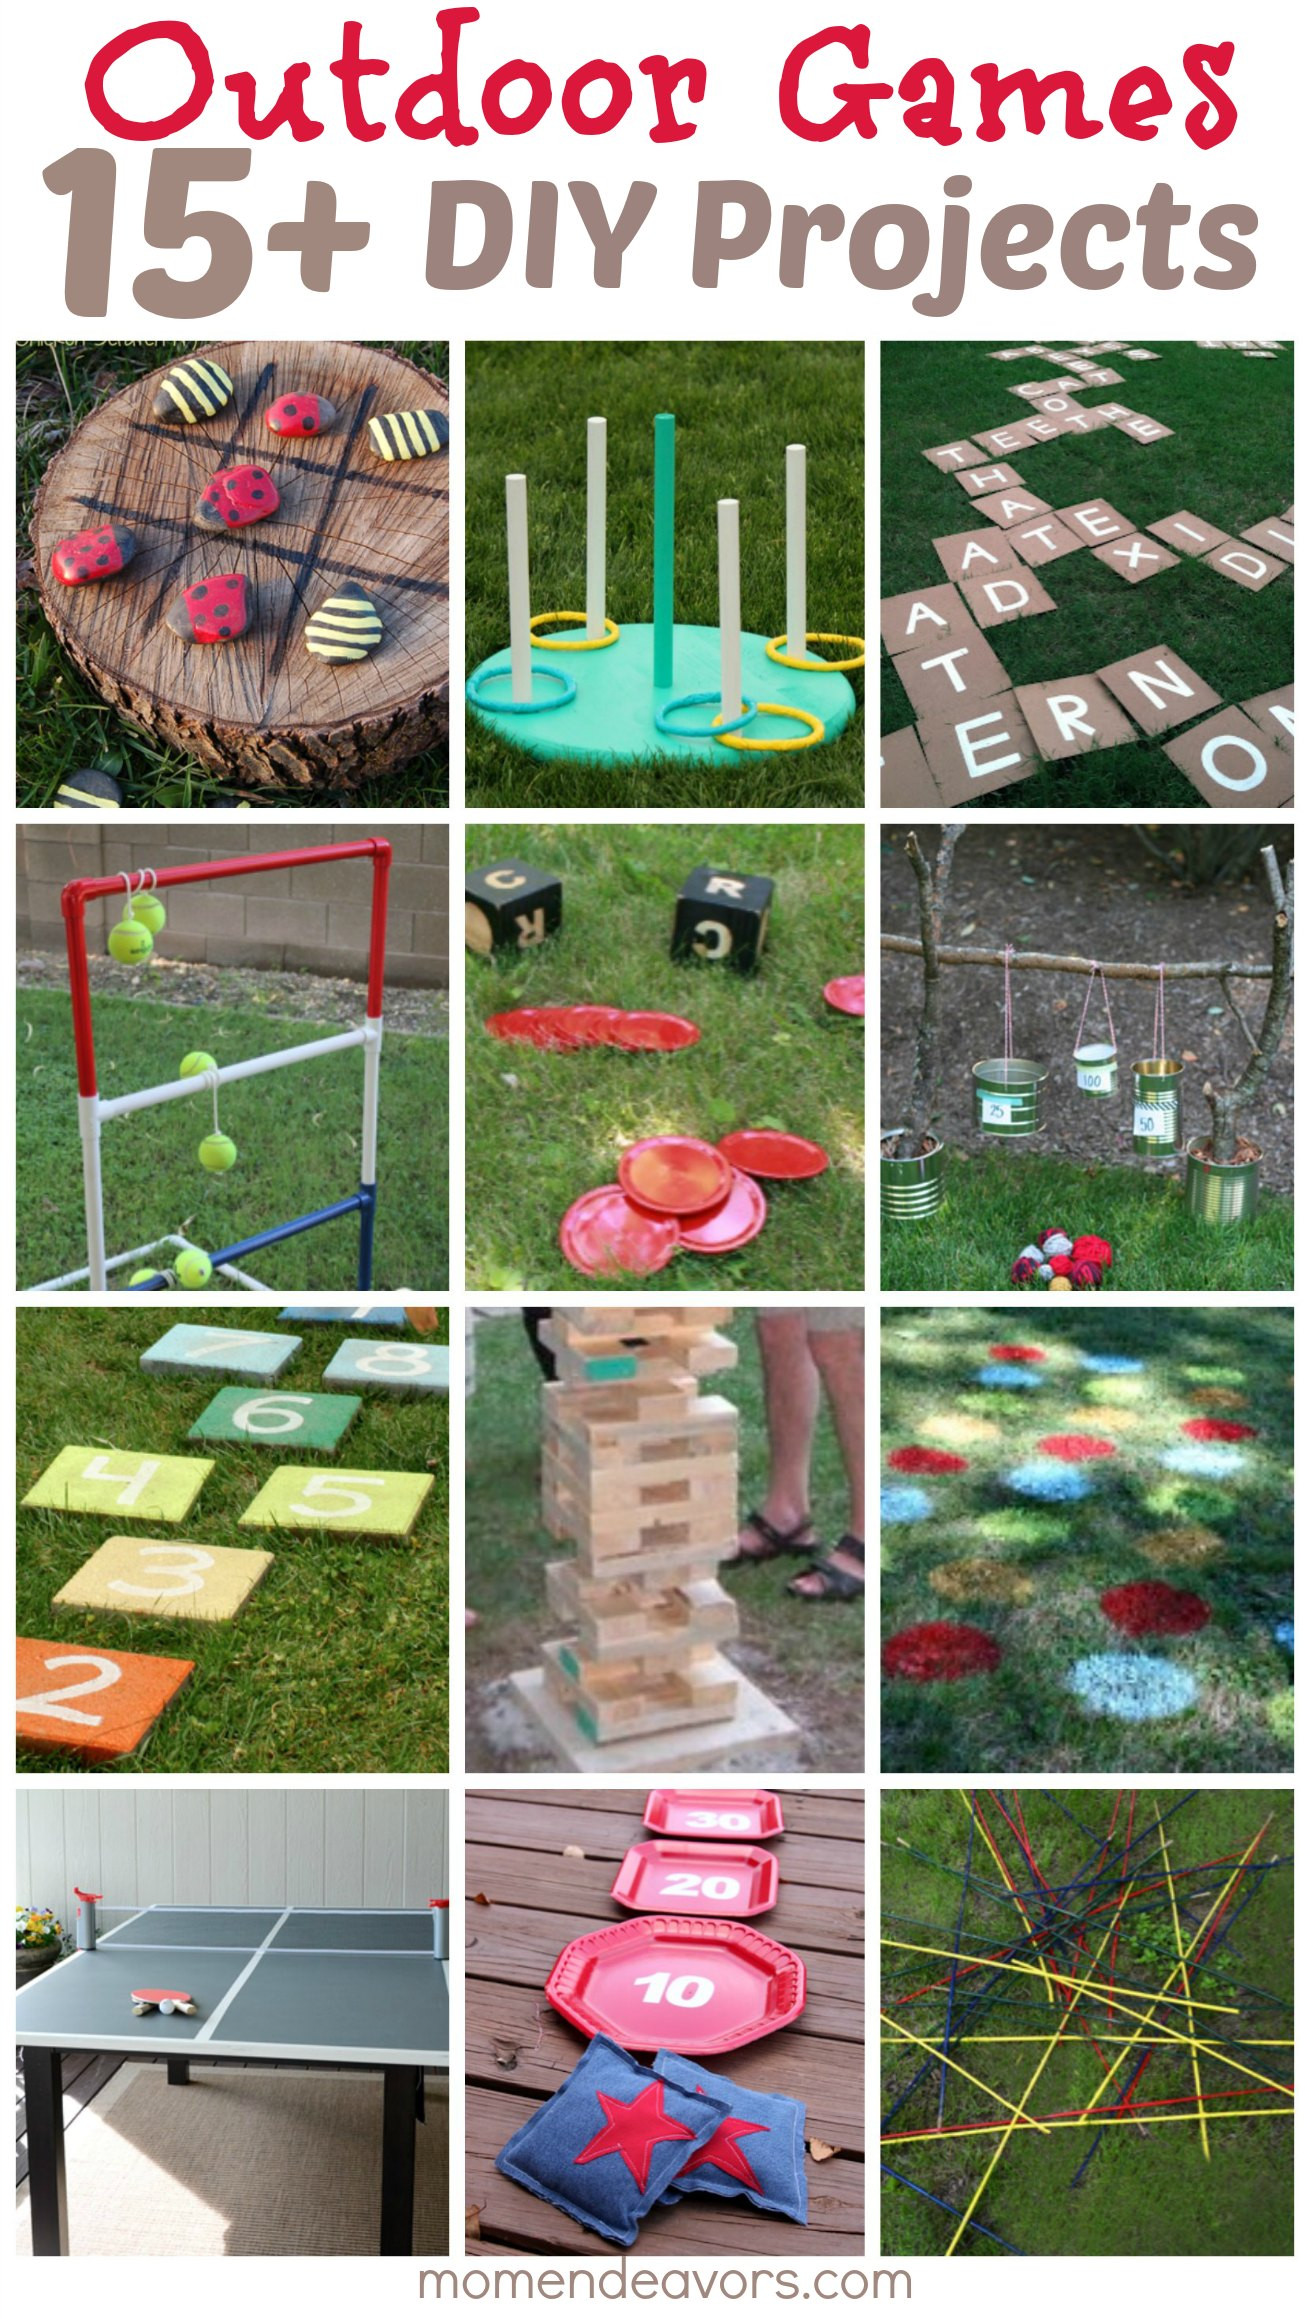 DIY Kids Party Games
 DIY Outdoor Games – 15 Awesome Project Ideas for Backyard